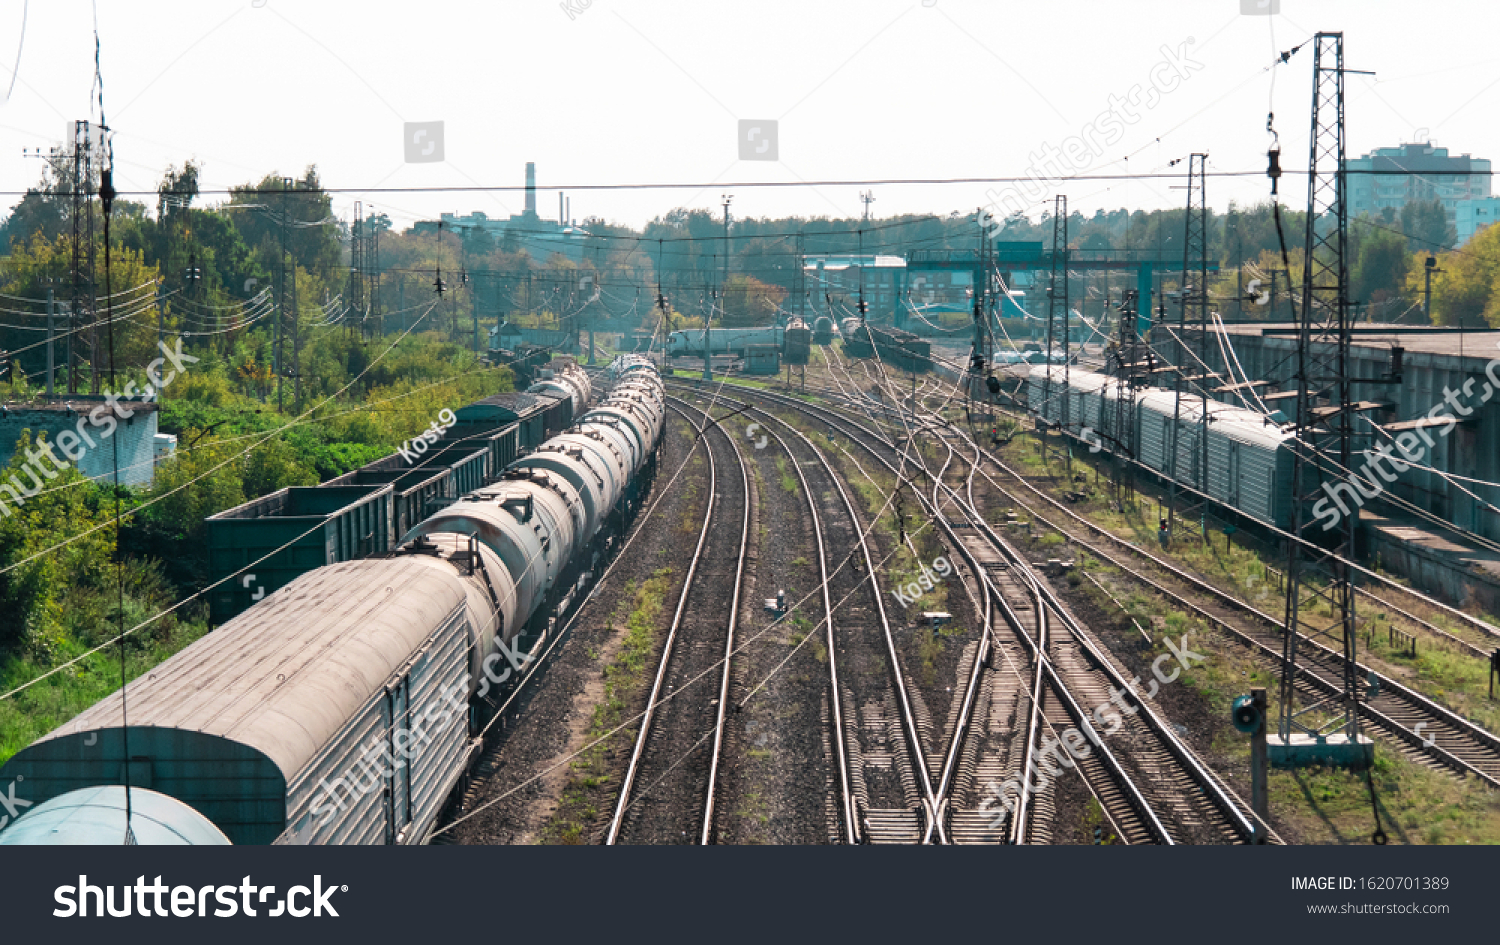 Freight train wagons. Transportation station. Transport industry background. Freight trains with gondola cars, tanks and a refrigerator car for transporting goods by rail. Business logistics,import.  #1620701389